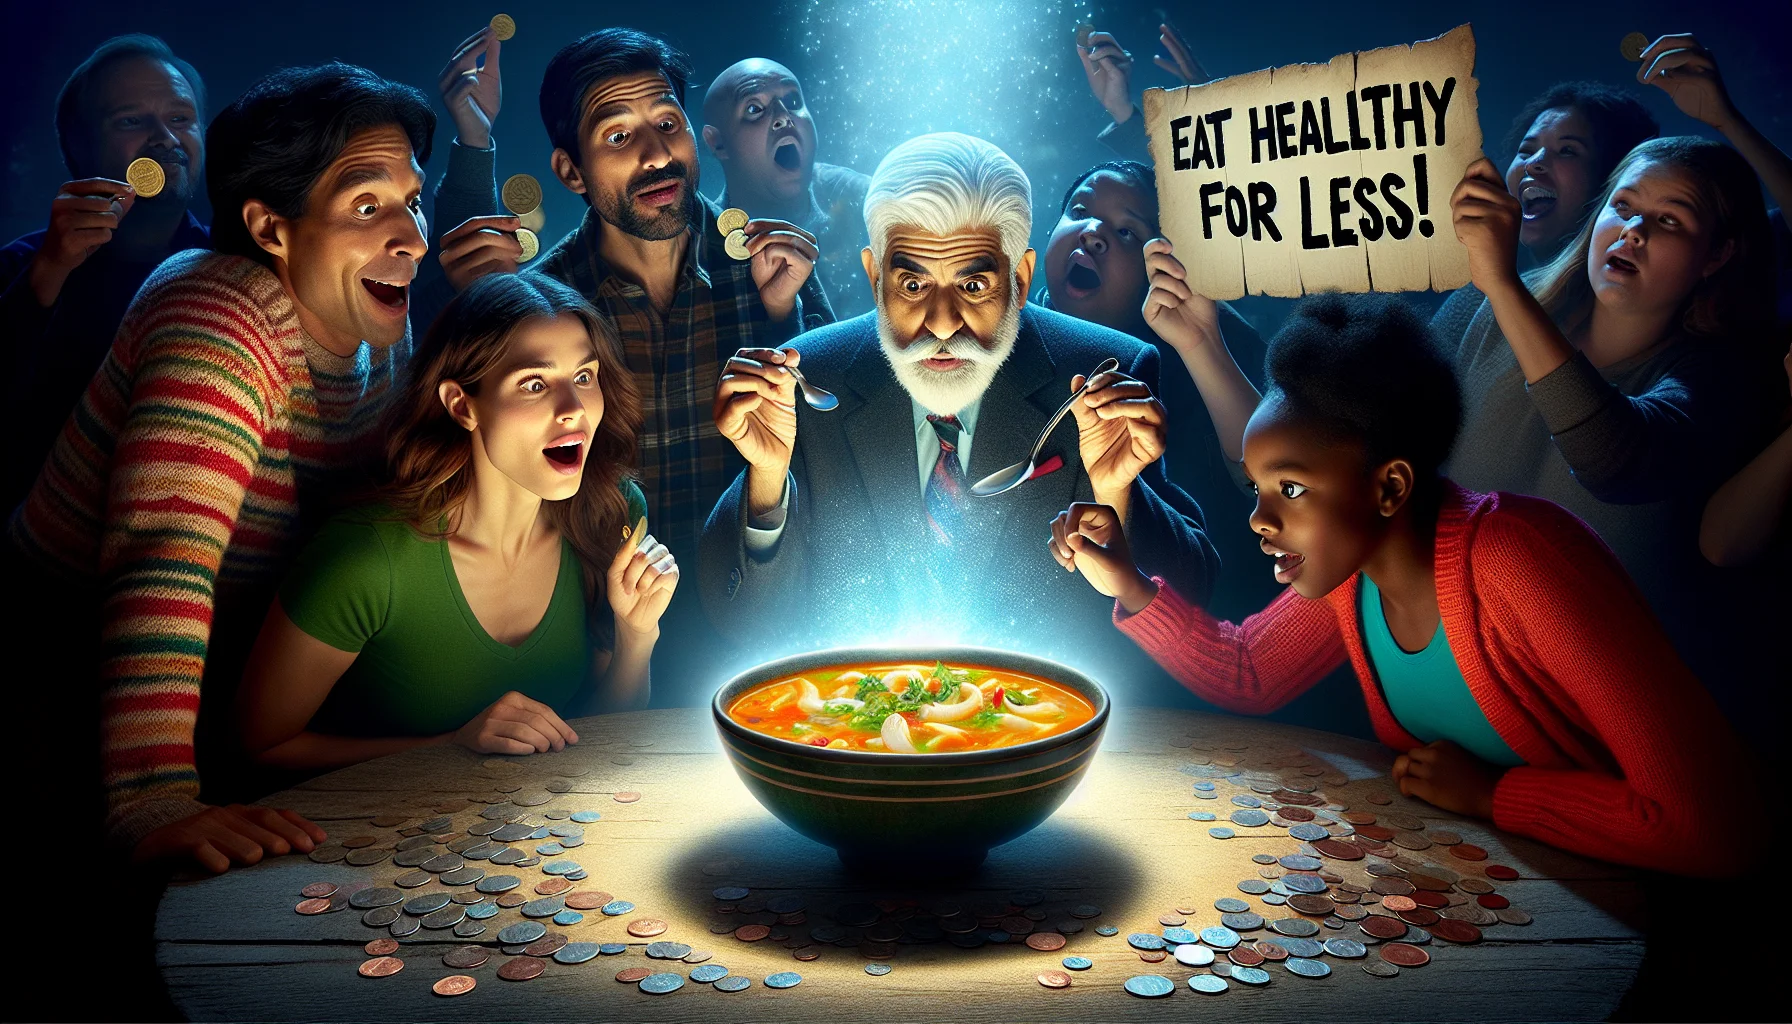 Imagine a hilarious and enticing scenario around a glowing bowl of Simple Three-Ingredient Soup. The soup is richly colored, steaming and radiating warmth. In the scene, a diverse group of people, including a Hispanic woman, a Caucasian man, and a Black child, are mesmerized by the magical aura of the soup. They gaze in awe of the soup, pulling out coins from their pockets, expressing that it is affordable and healthful. Perhaps a sign could read, 'Eat healthy for less!' to emphasize this message. The allure of low cost, high nutrition food has brought them together in this humorous tableau.